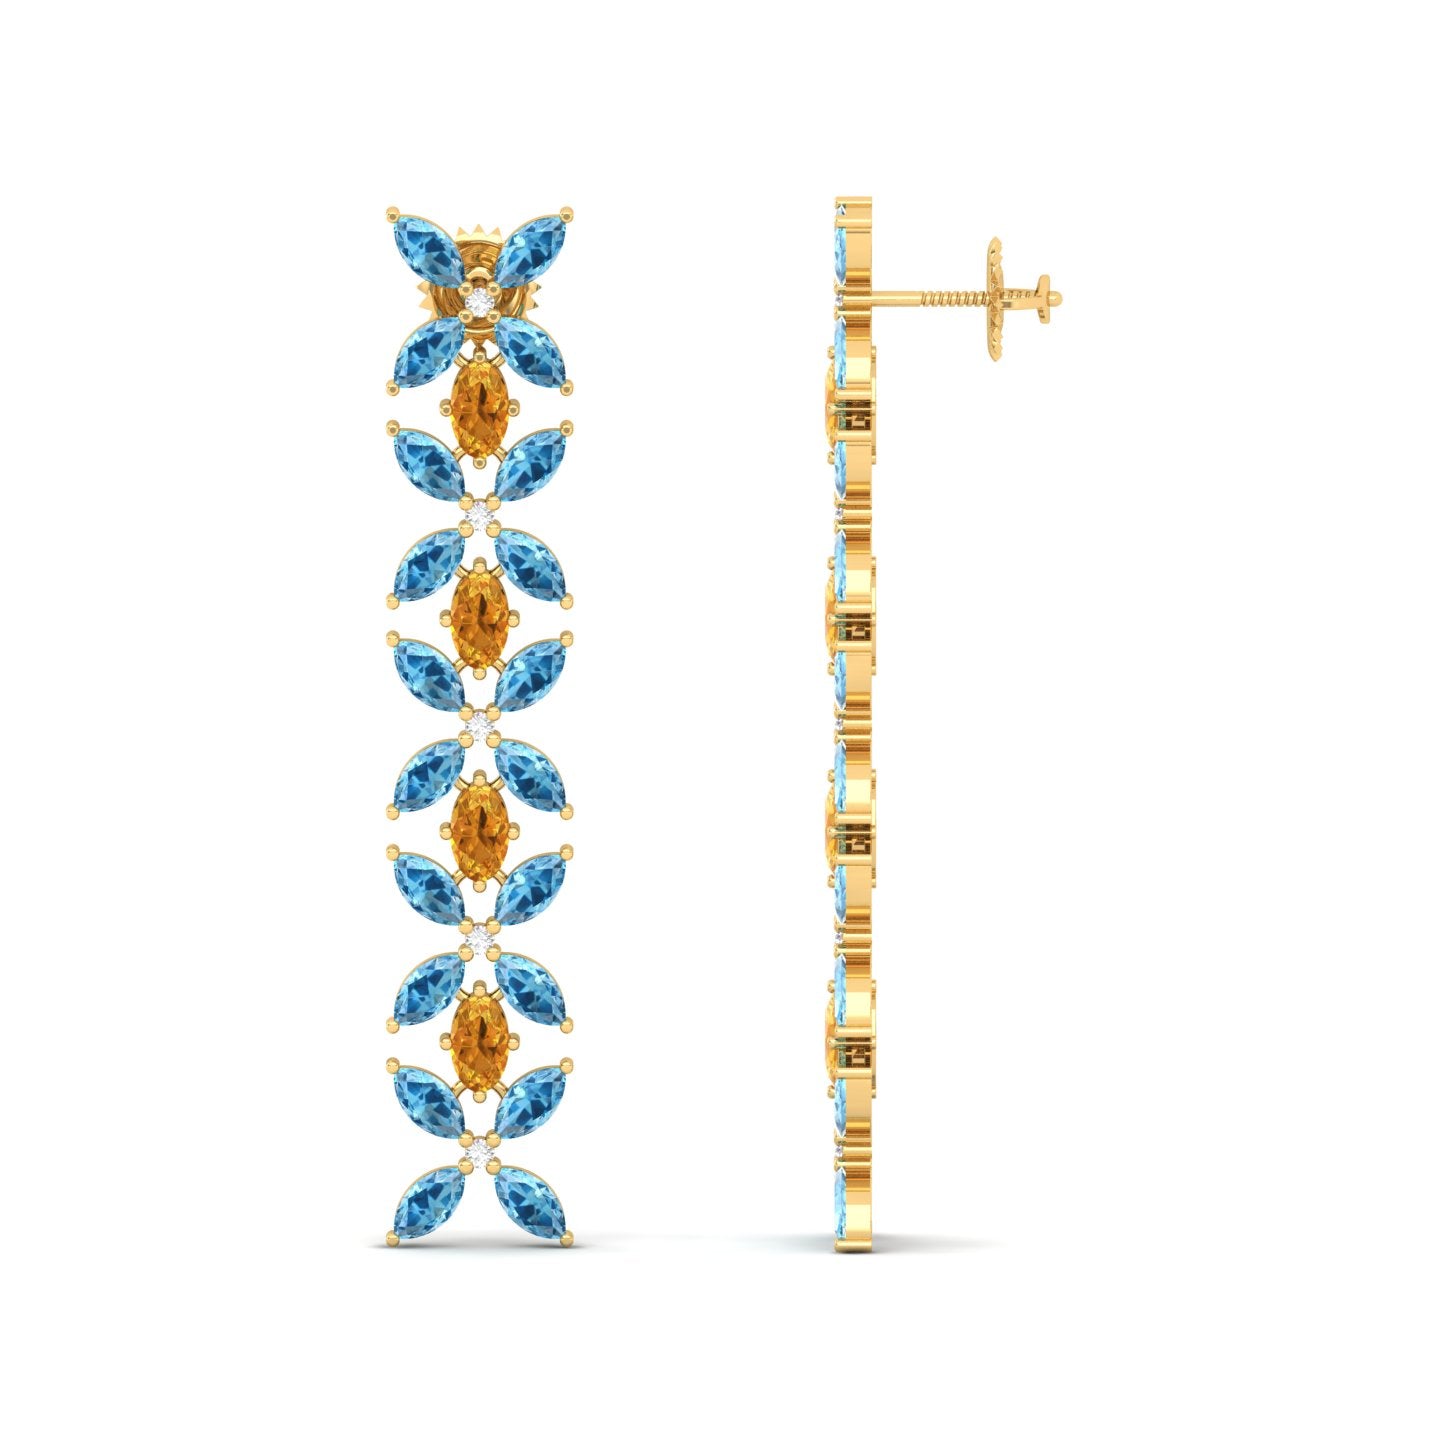 Maurya Remo Dangle Earrings with Topaz and Citrine